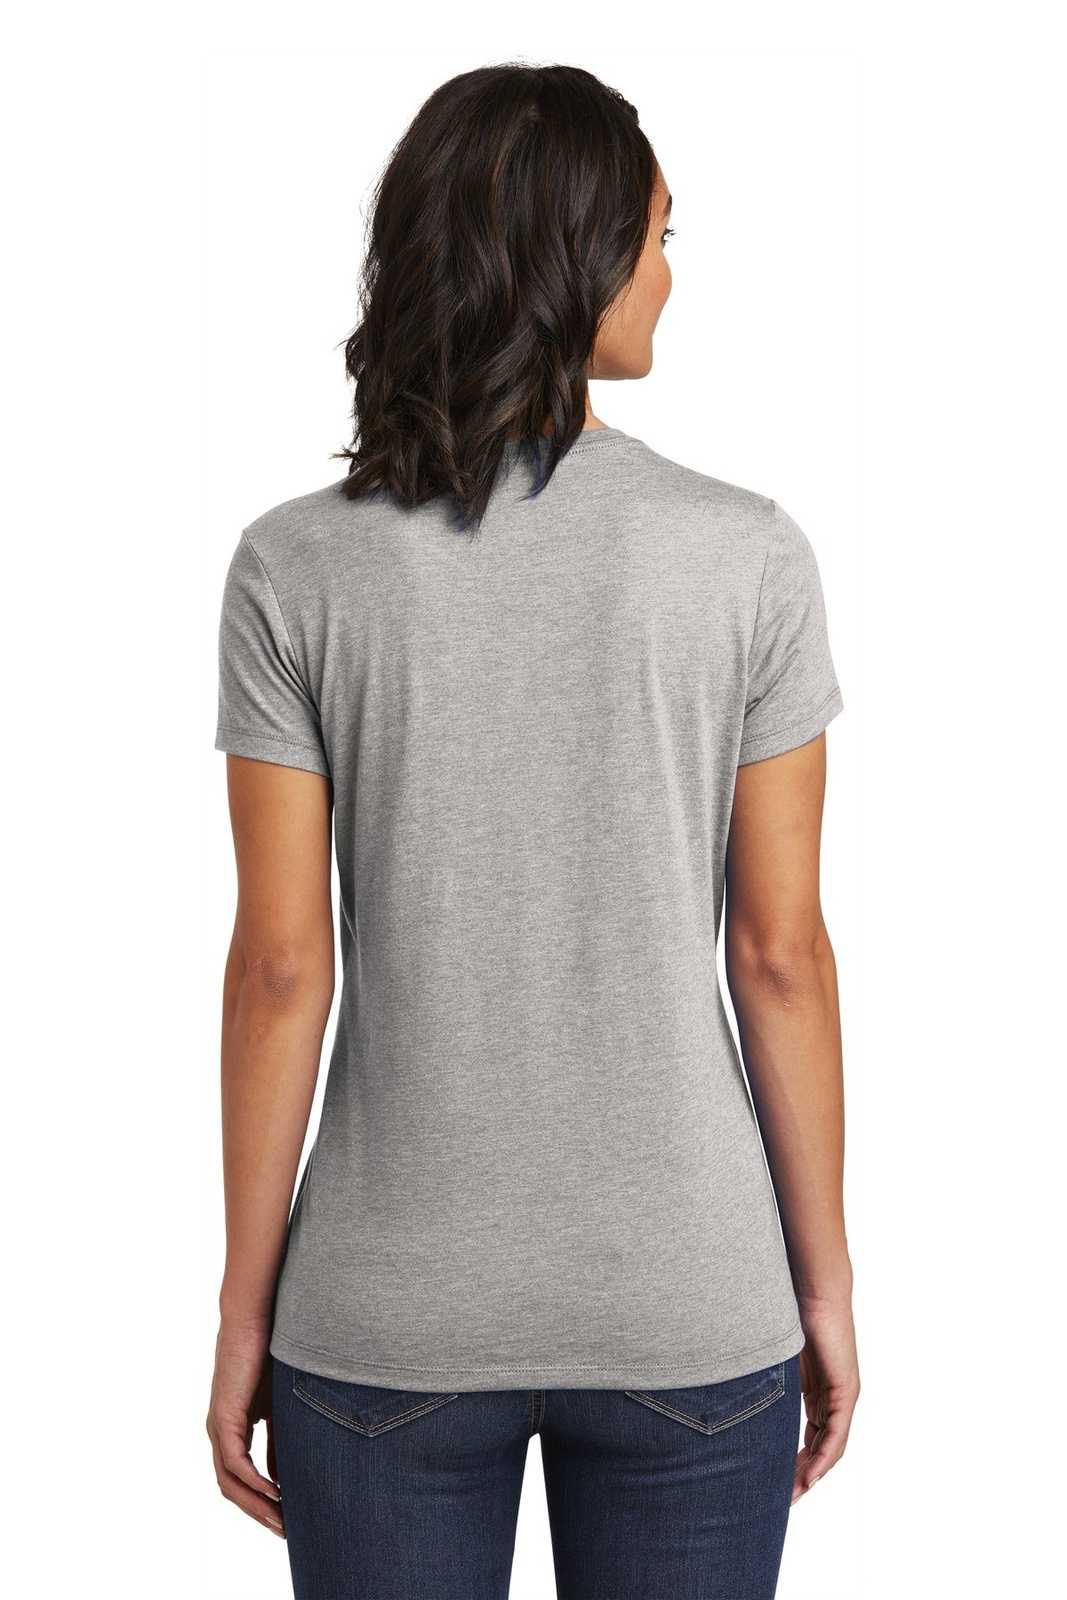 District DT6002 Women's Very Important Tee - Light Heather Gray - HIT a Double - 1